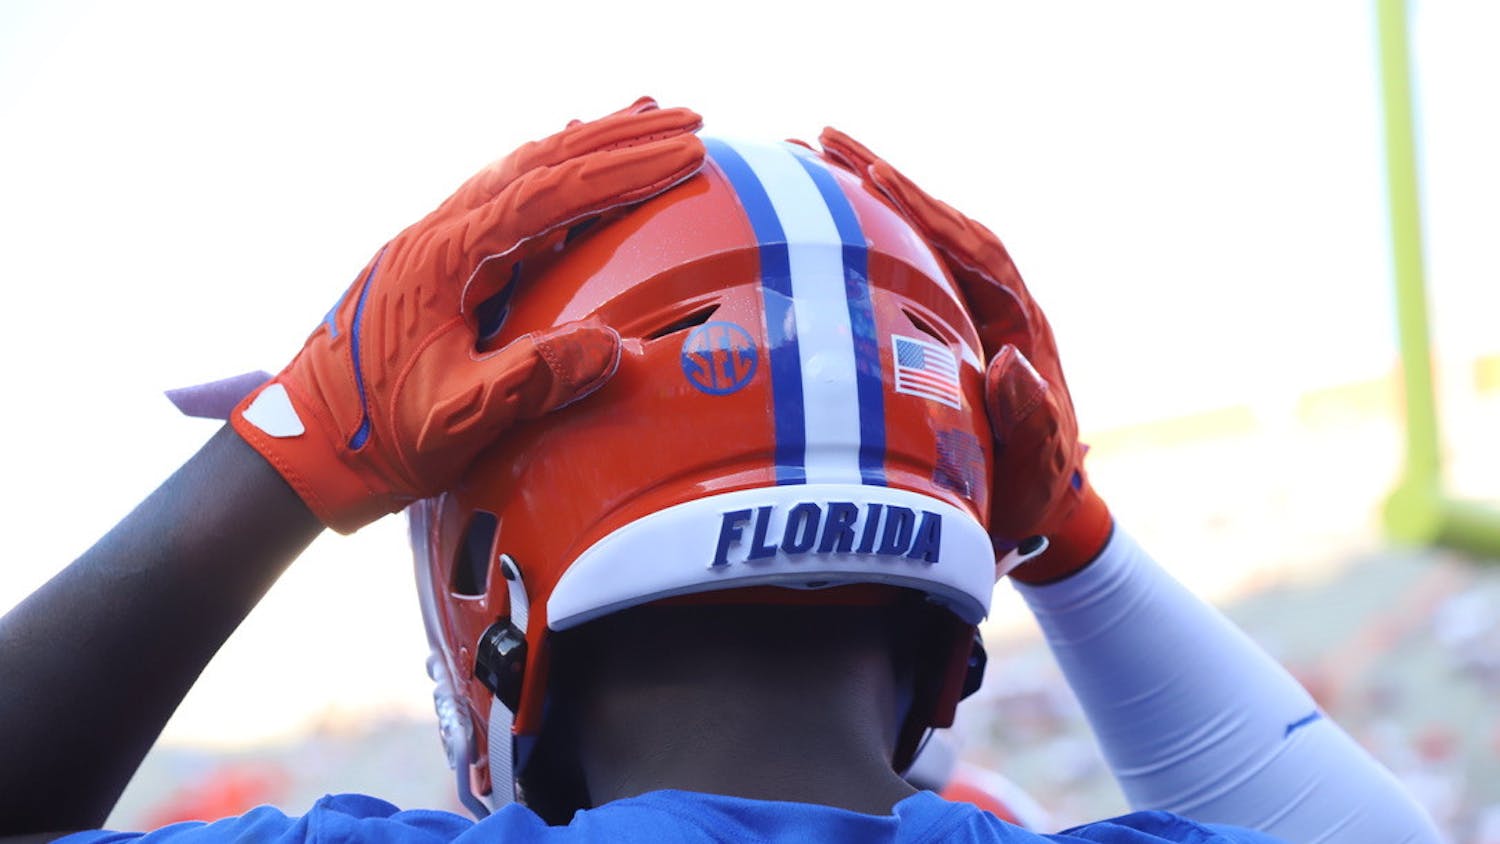 A Florida player touches his helmet during warmups before a game against Florida Atlantic on Sept. 4.